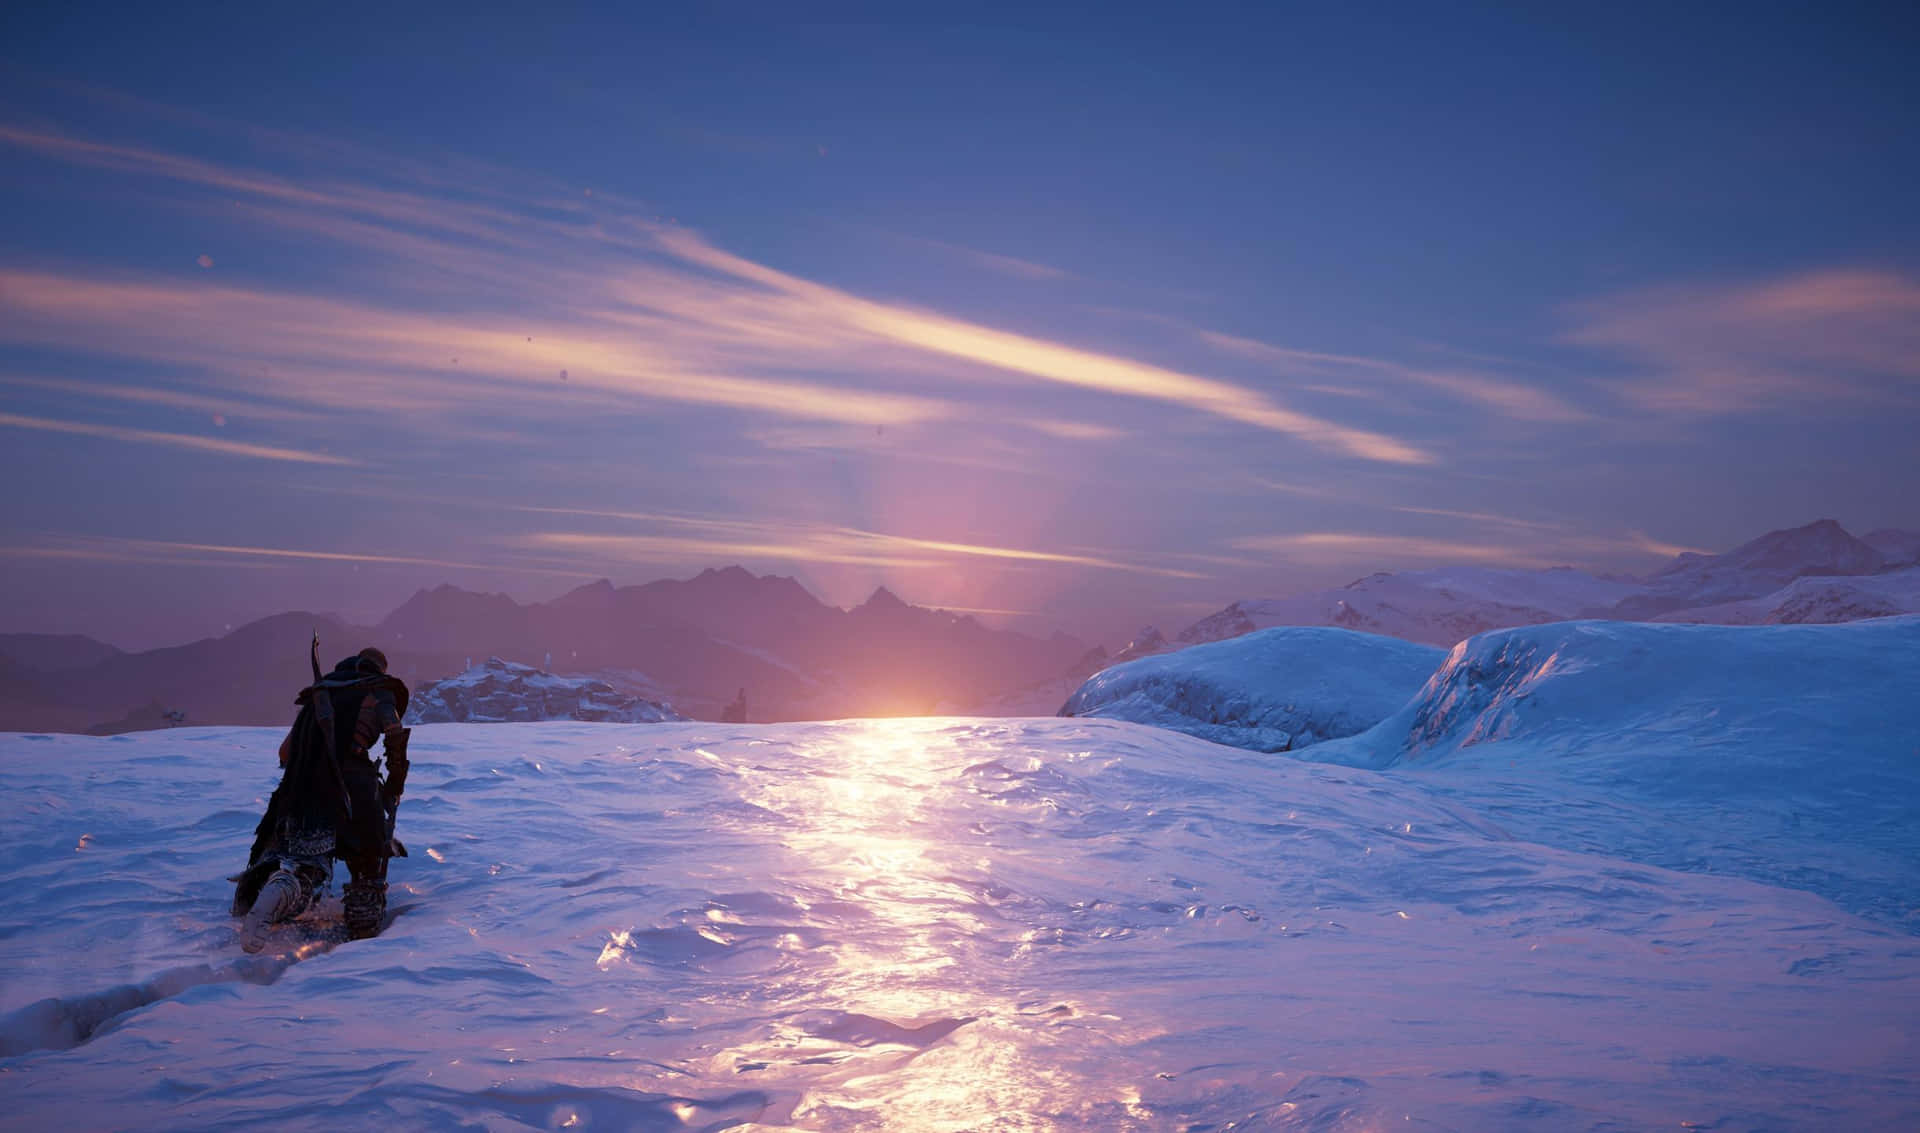 A Man Is Standing On A Snowy Mountain In The Evening